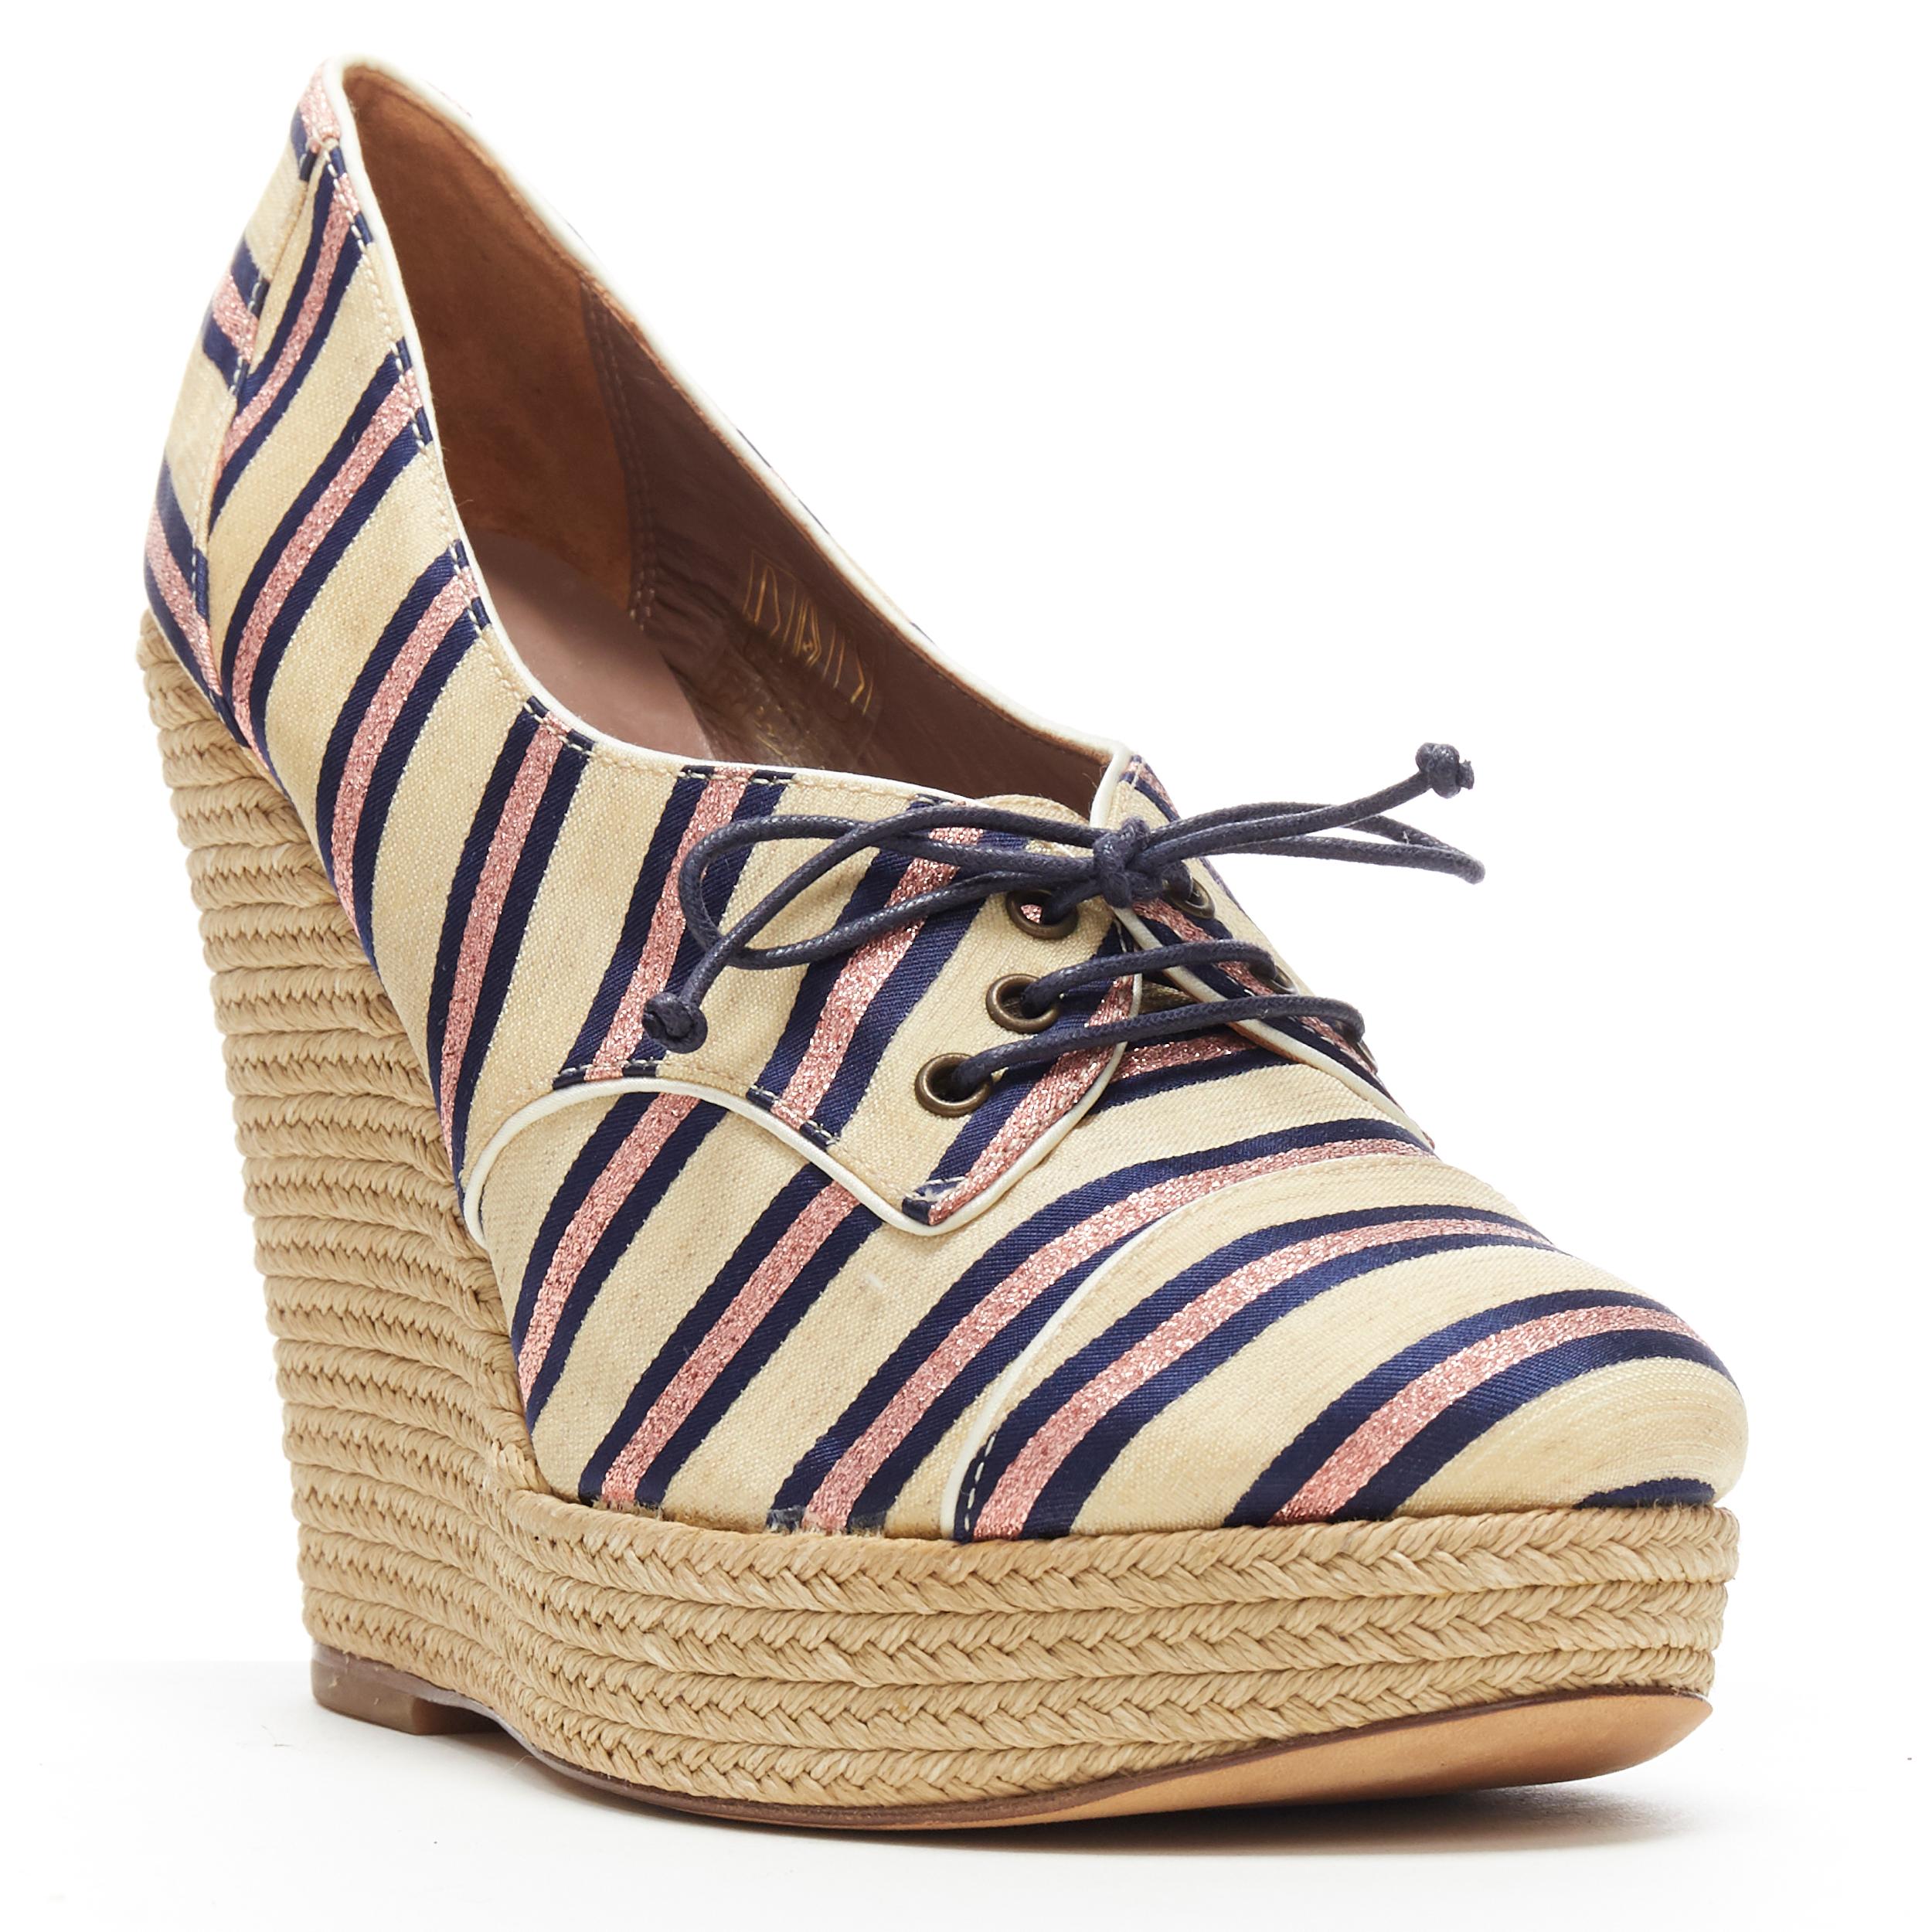 TABITHA SIMMONS metallic pink striped canvas jute platform wedge heel EU37
Brand: Tabitha Simmons
Designer: Tabitha Simmons
Model Name / Style: Wedge
Material: Fabric
Color: Beige; and pink
Pattern: Striped
Closure: Lace up
Lining material: